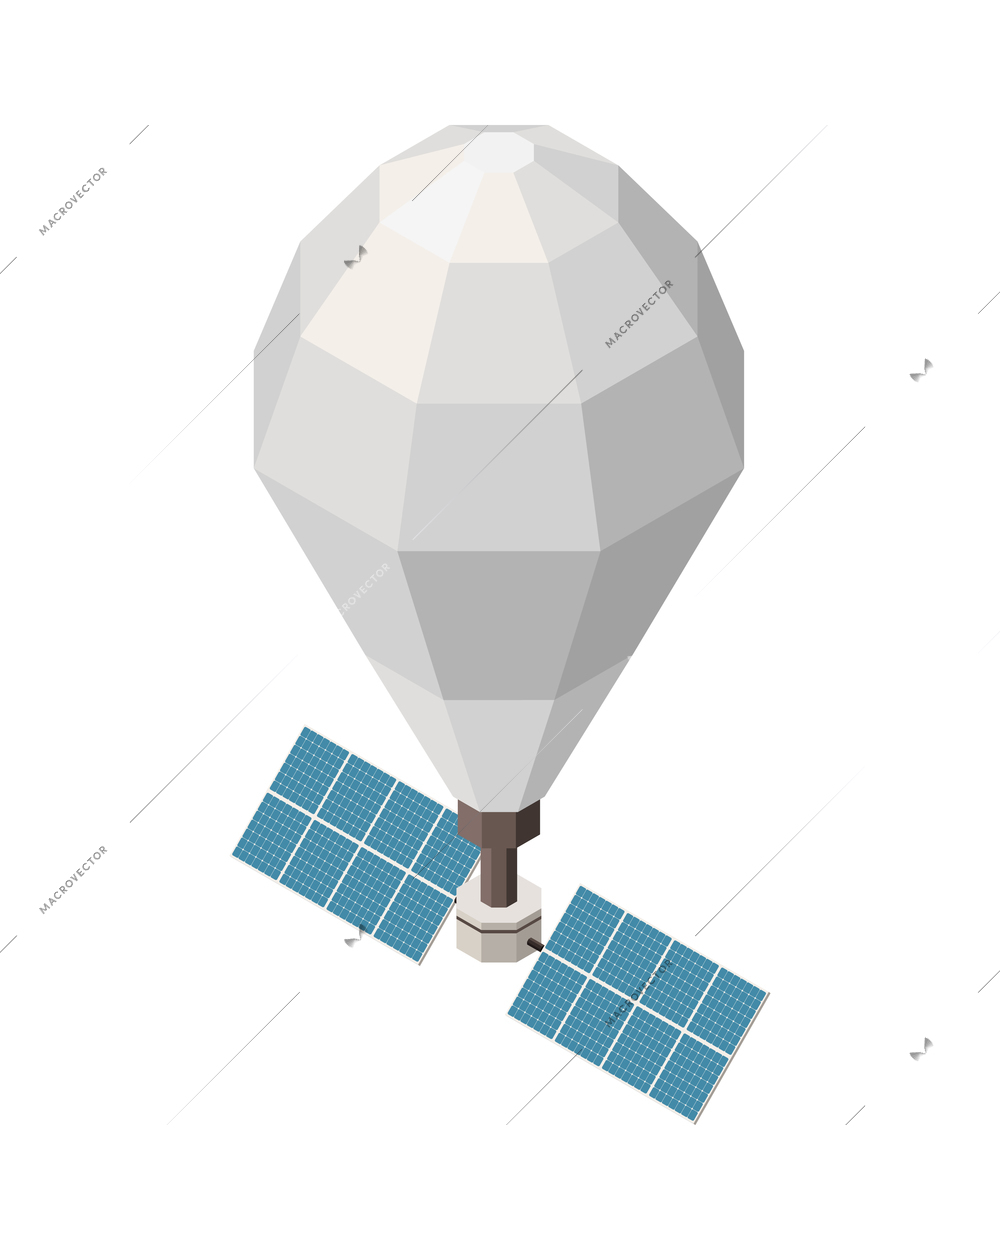 Modern internet 5g communication technology isometric composition with isolated image of satellite vector illustration